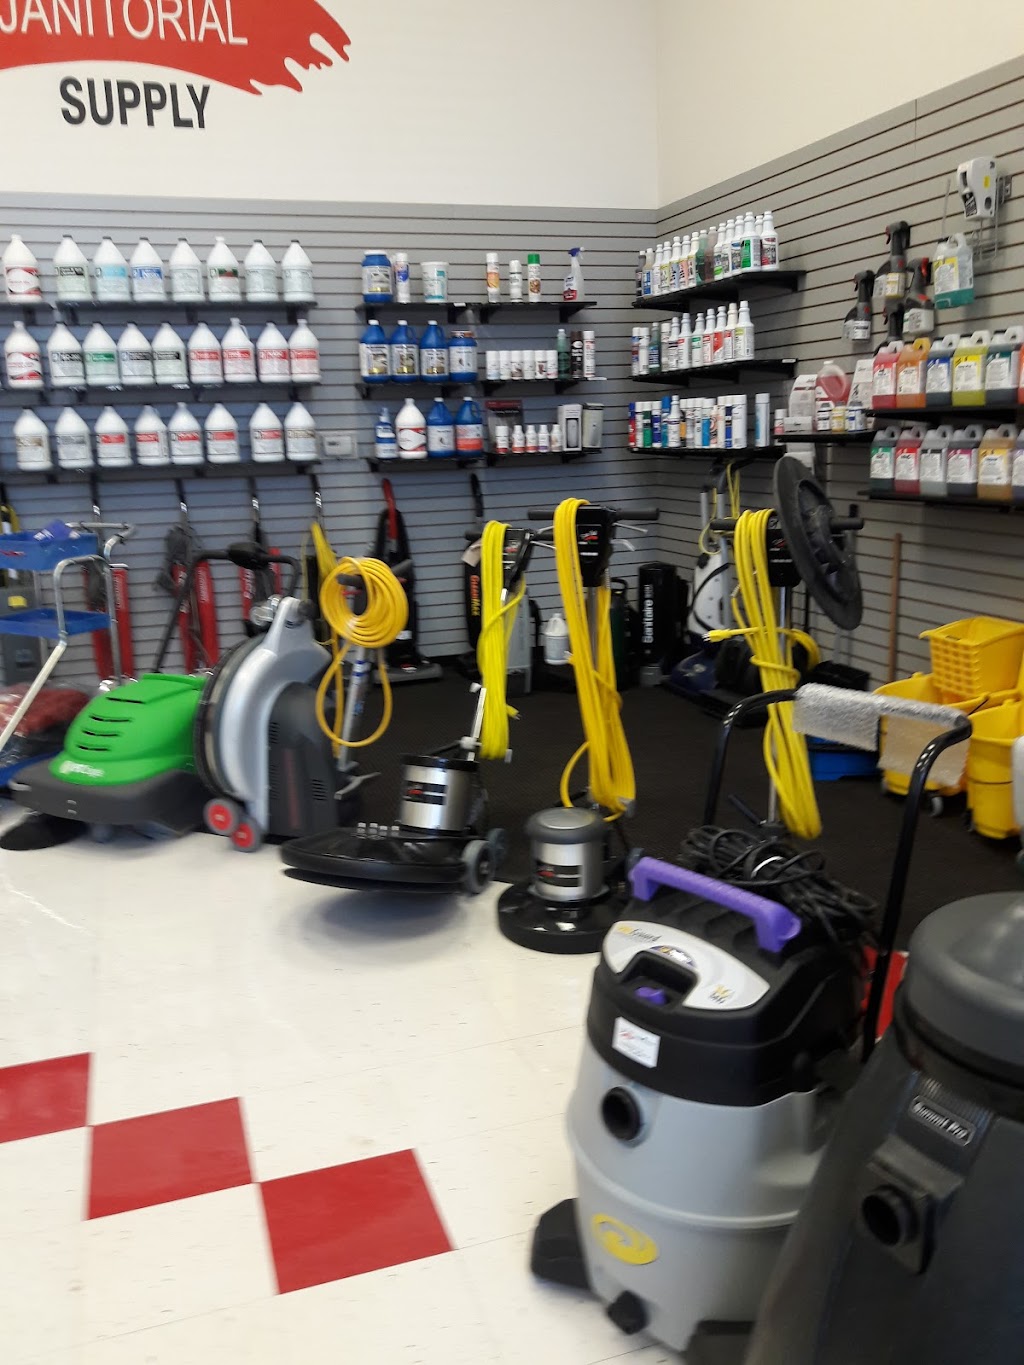 Sac-Val Janitorial Sales | 2421 Del Monte St, West Sacramento, CA 95691 | Phone: (916) 231-0584